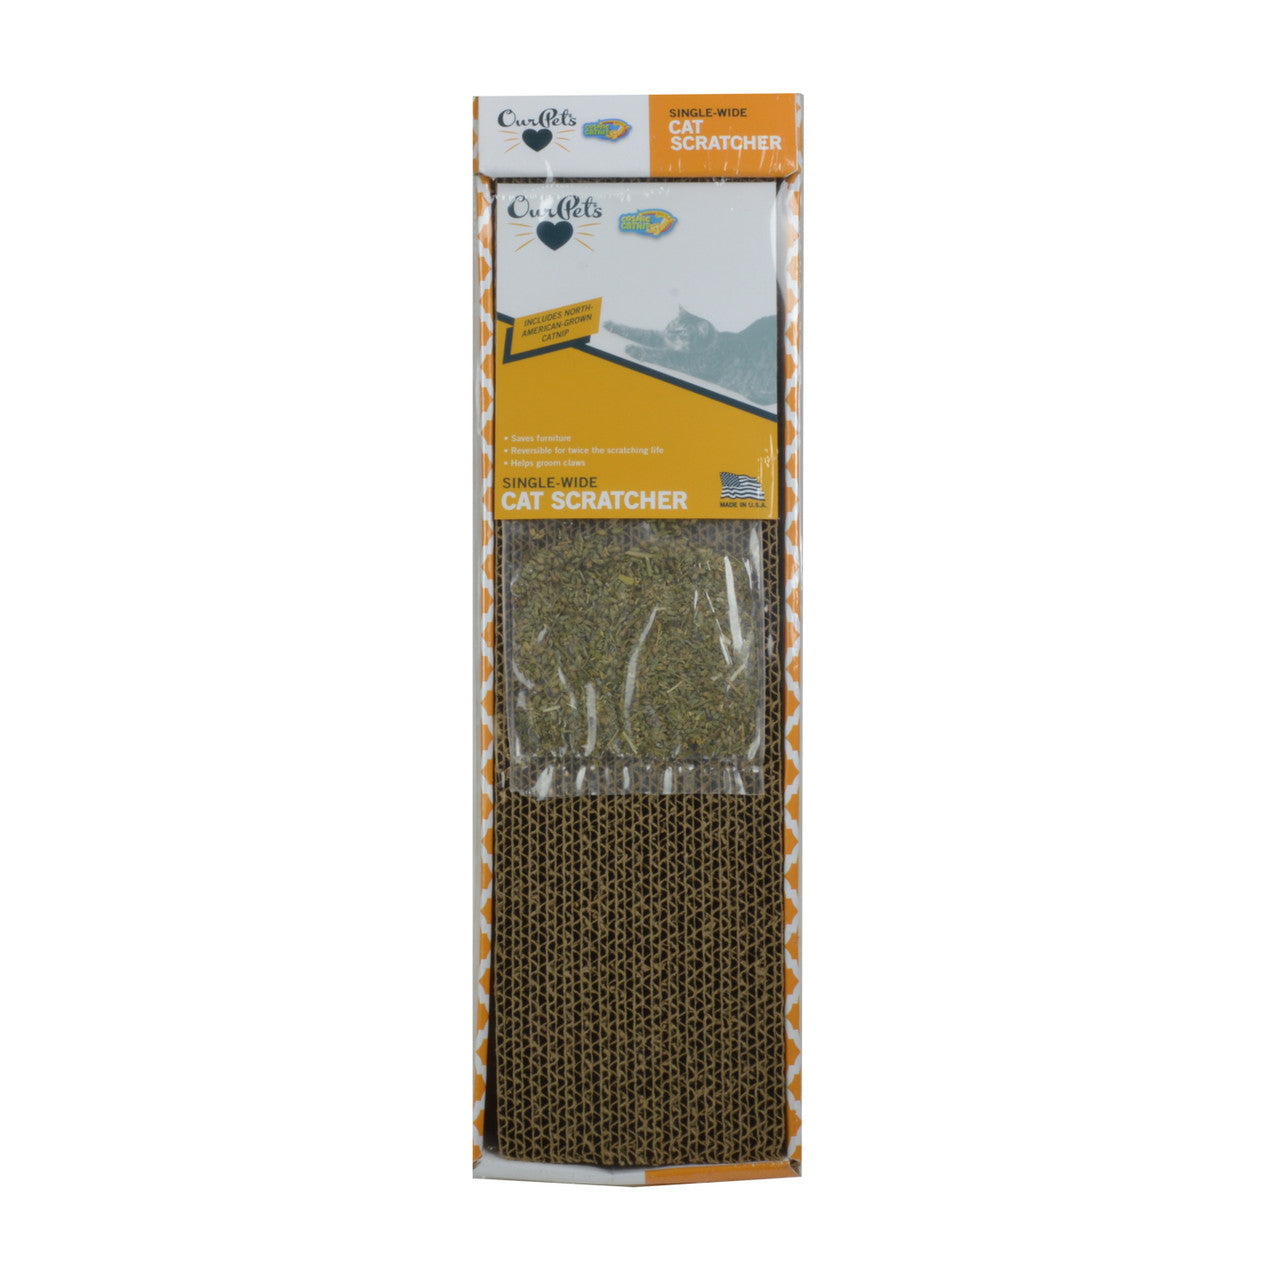 OurPets Cosmic Single Wide Cat Scratcher Brown, Yellow